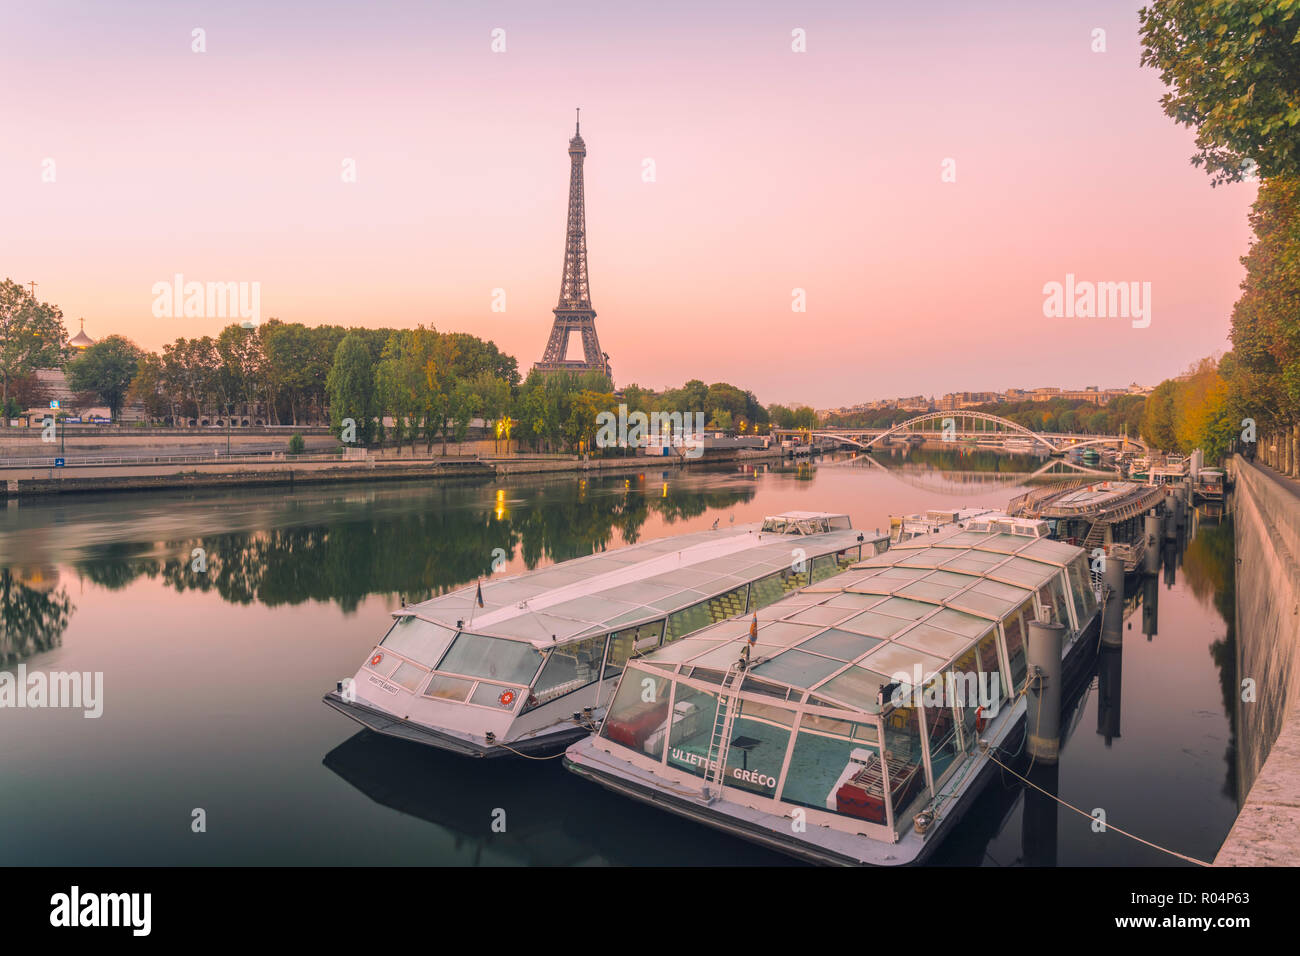 View of Eiffel Tower on the River Seine early in the morning in autumn, Paris, France, Europe Stock Photo